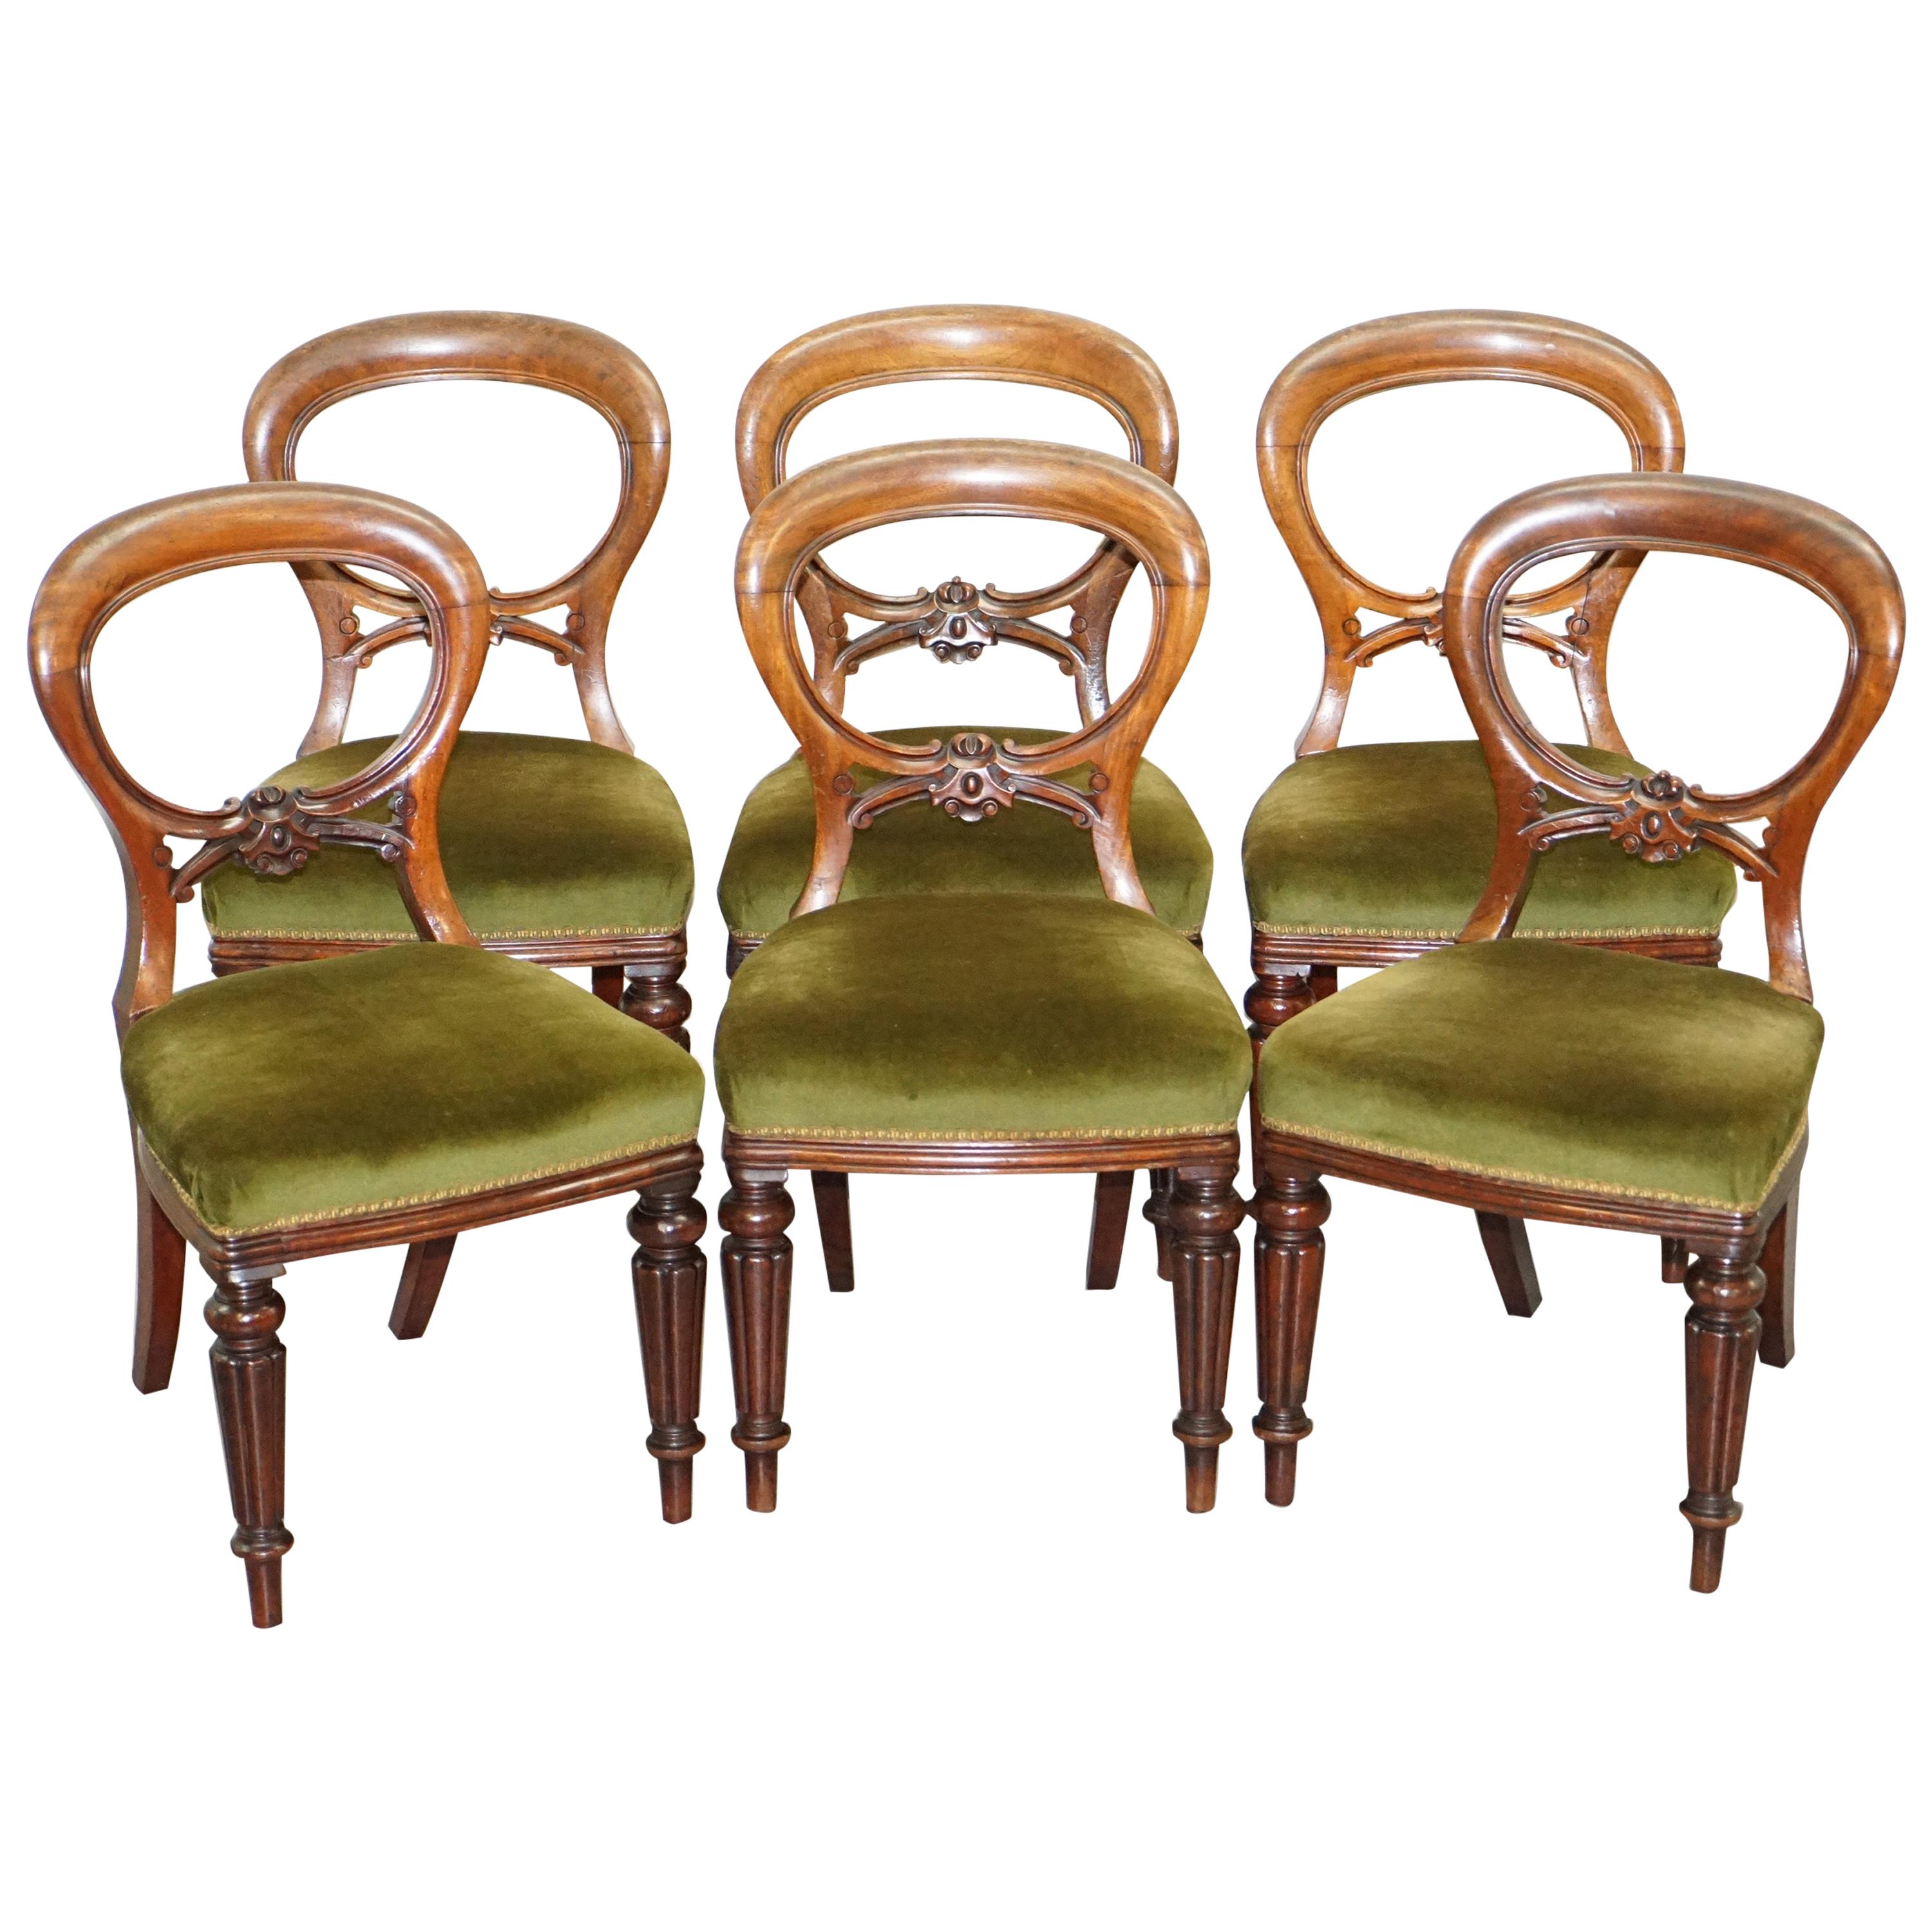 Antque Suite of circa 1860 Victorian Balloon Medallion Back Dining Chairs